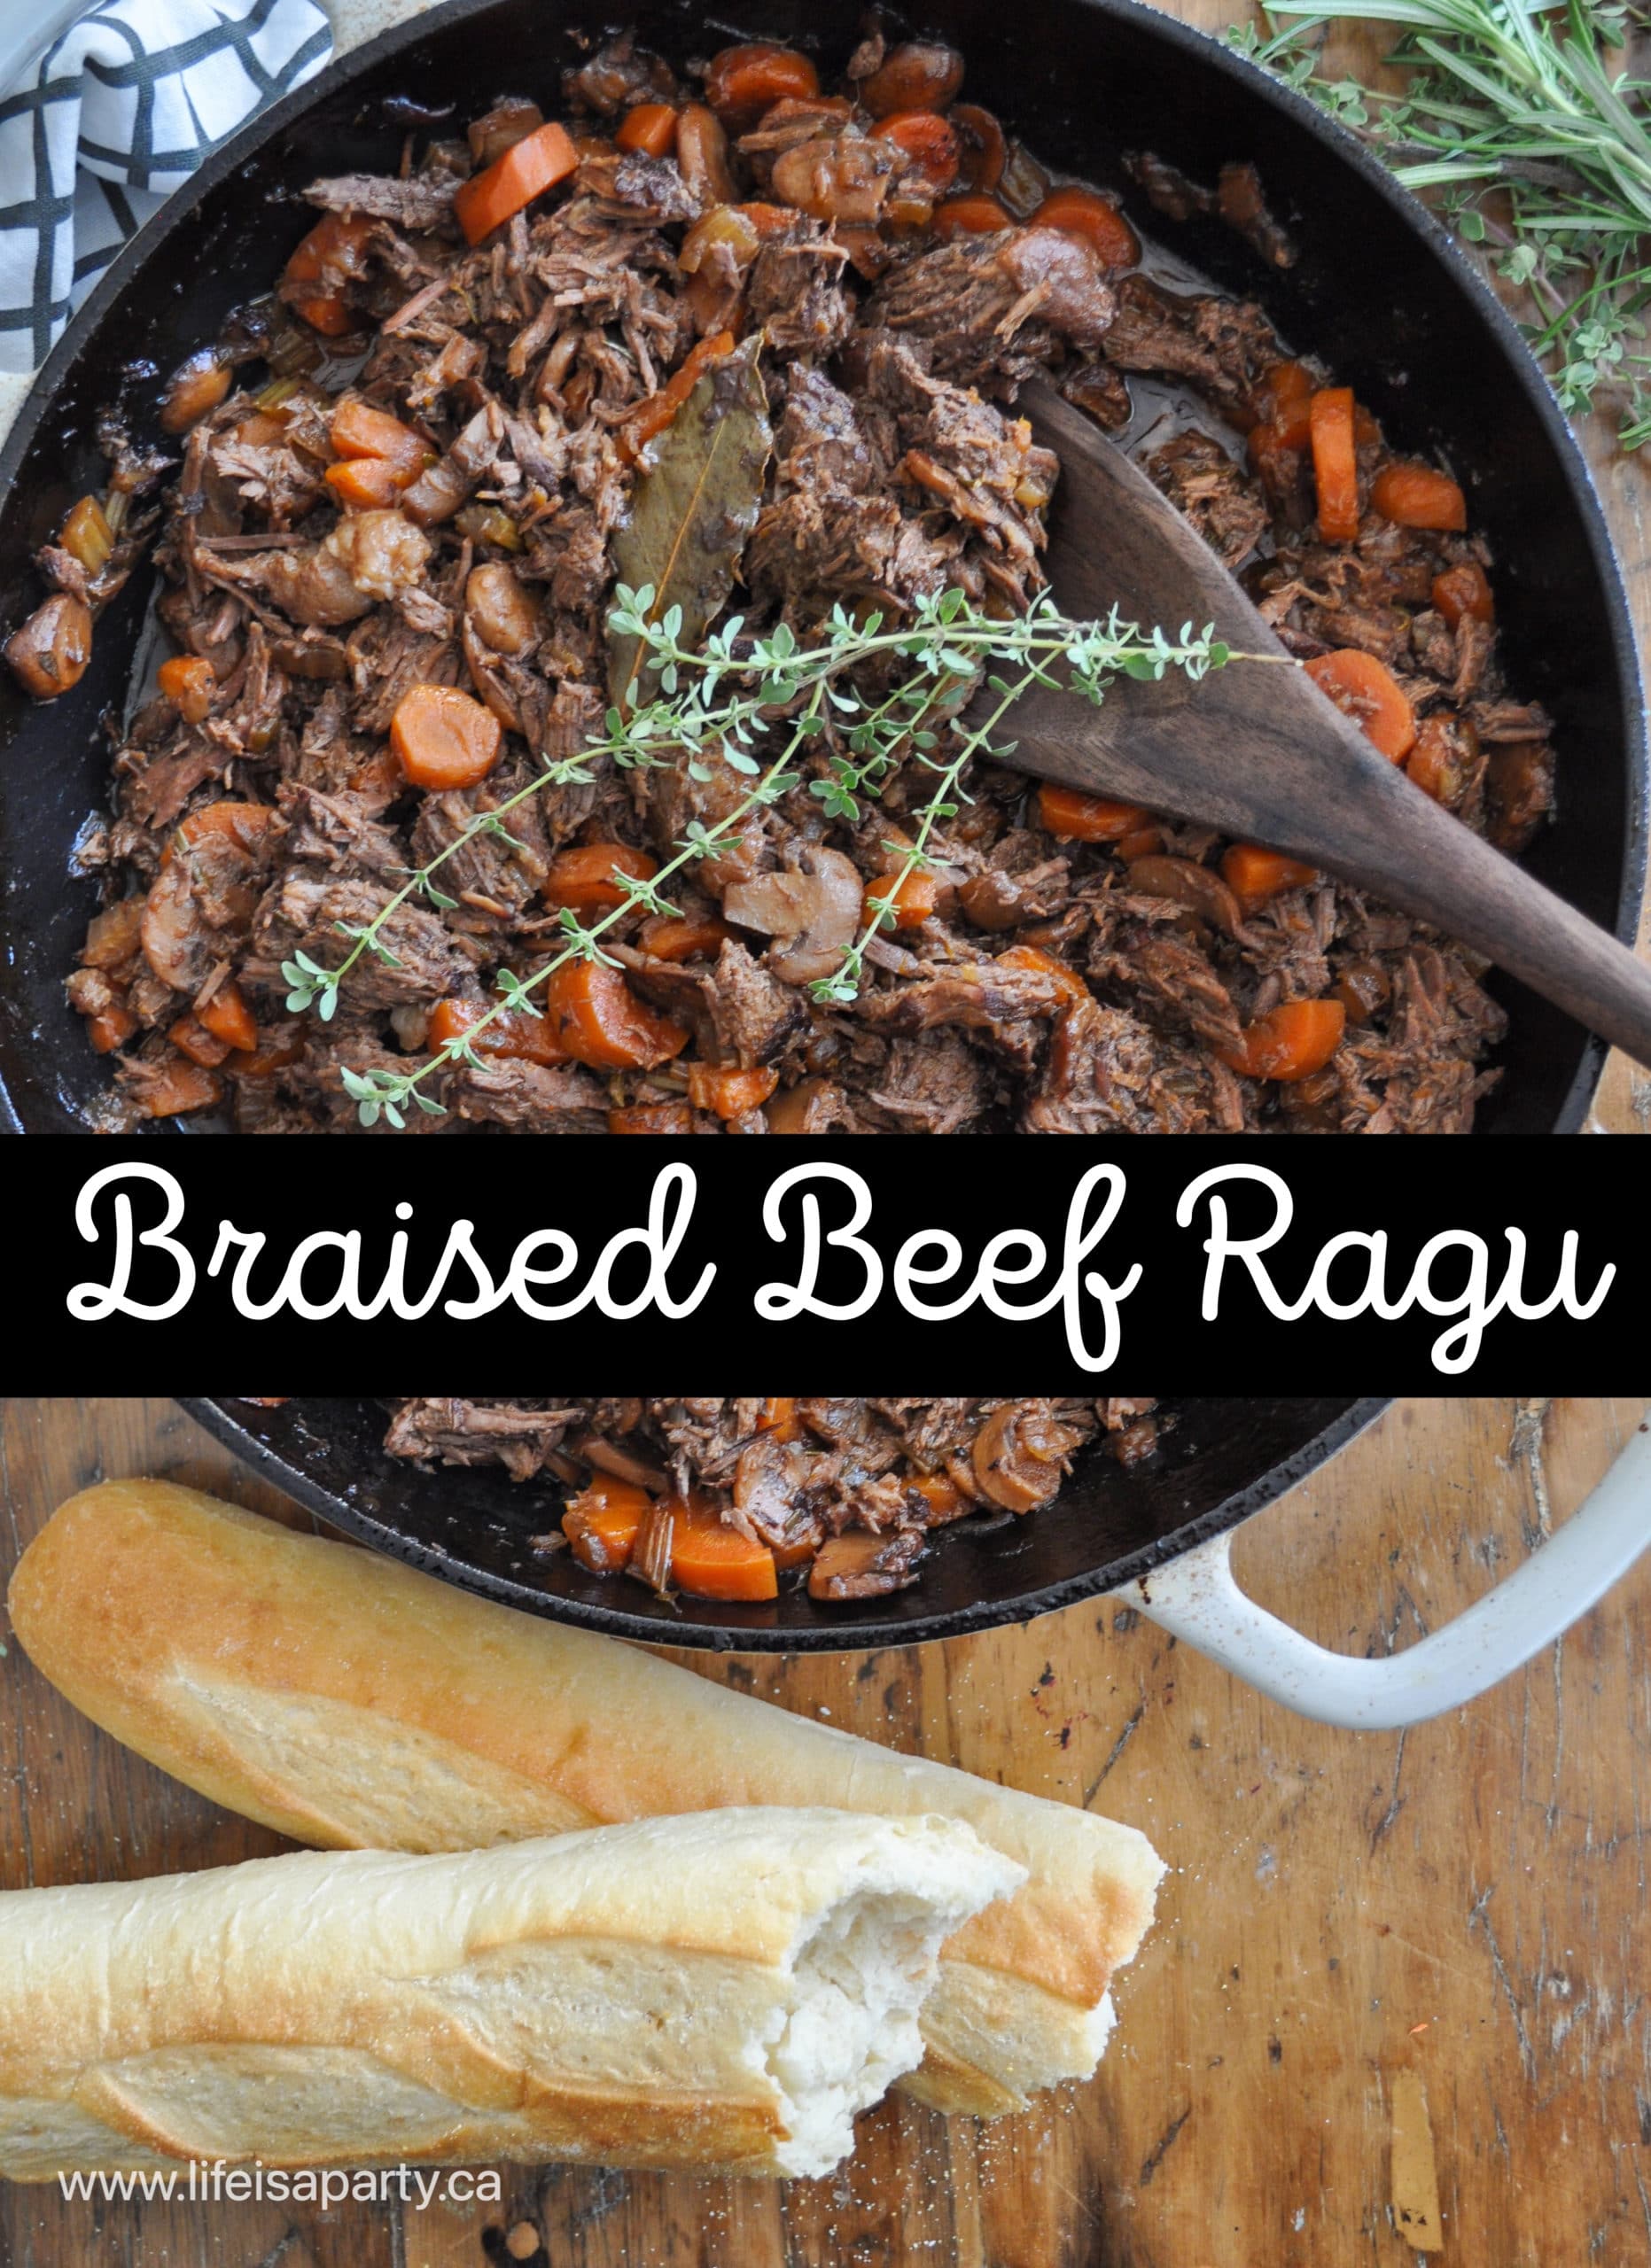 Braised Beef Ragu: rich beef dish is slow cooked in the oven until fork tender. Serve with pasta or mashed potatoes, perfect comfort food.